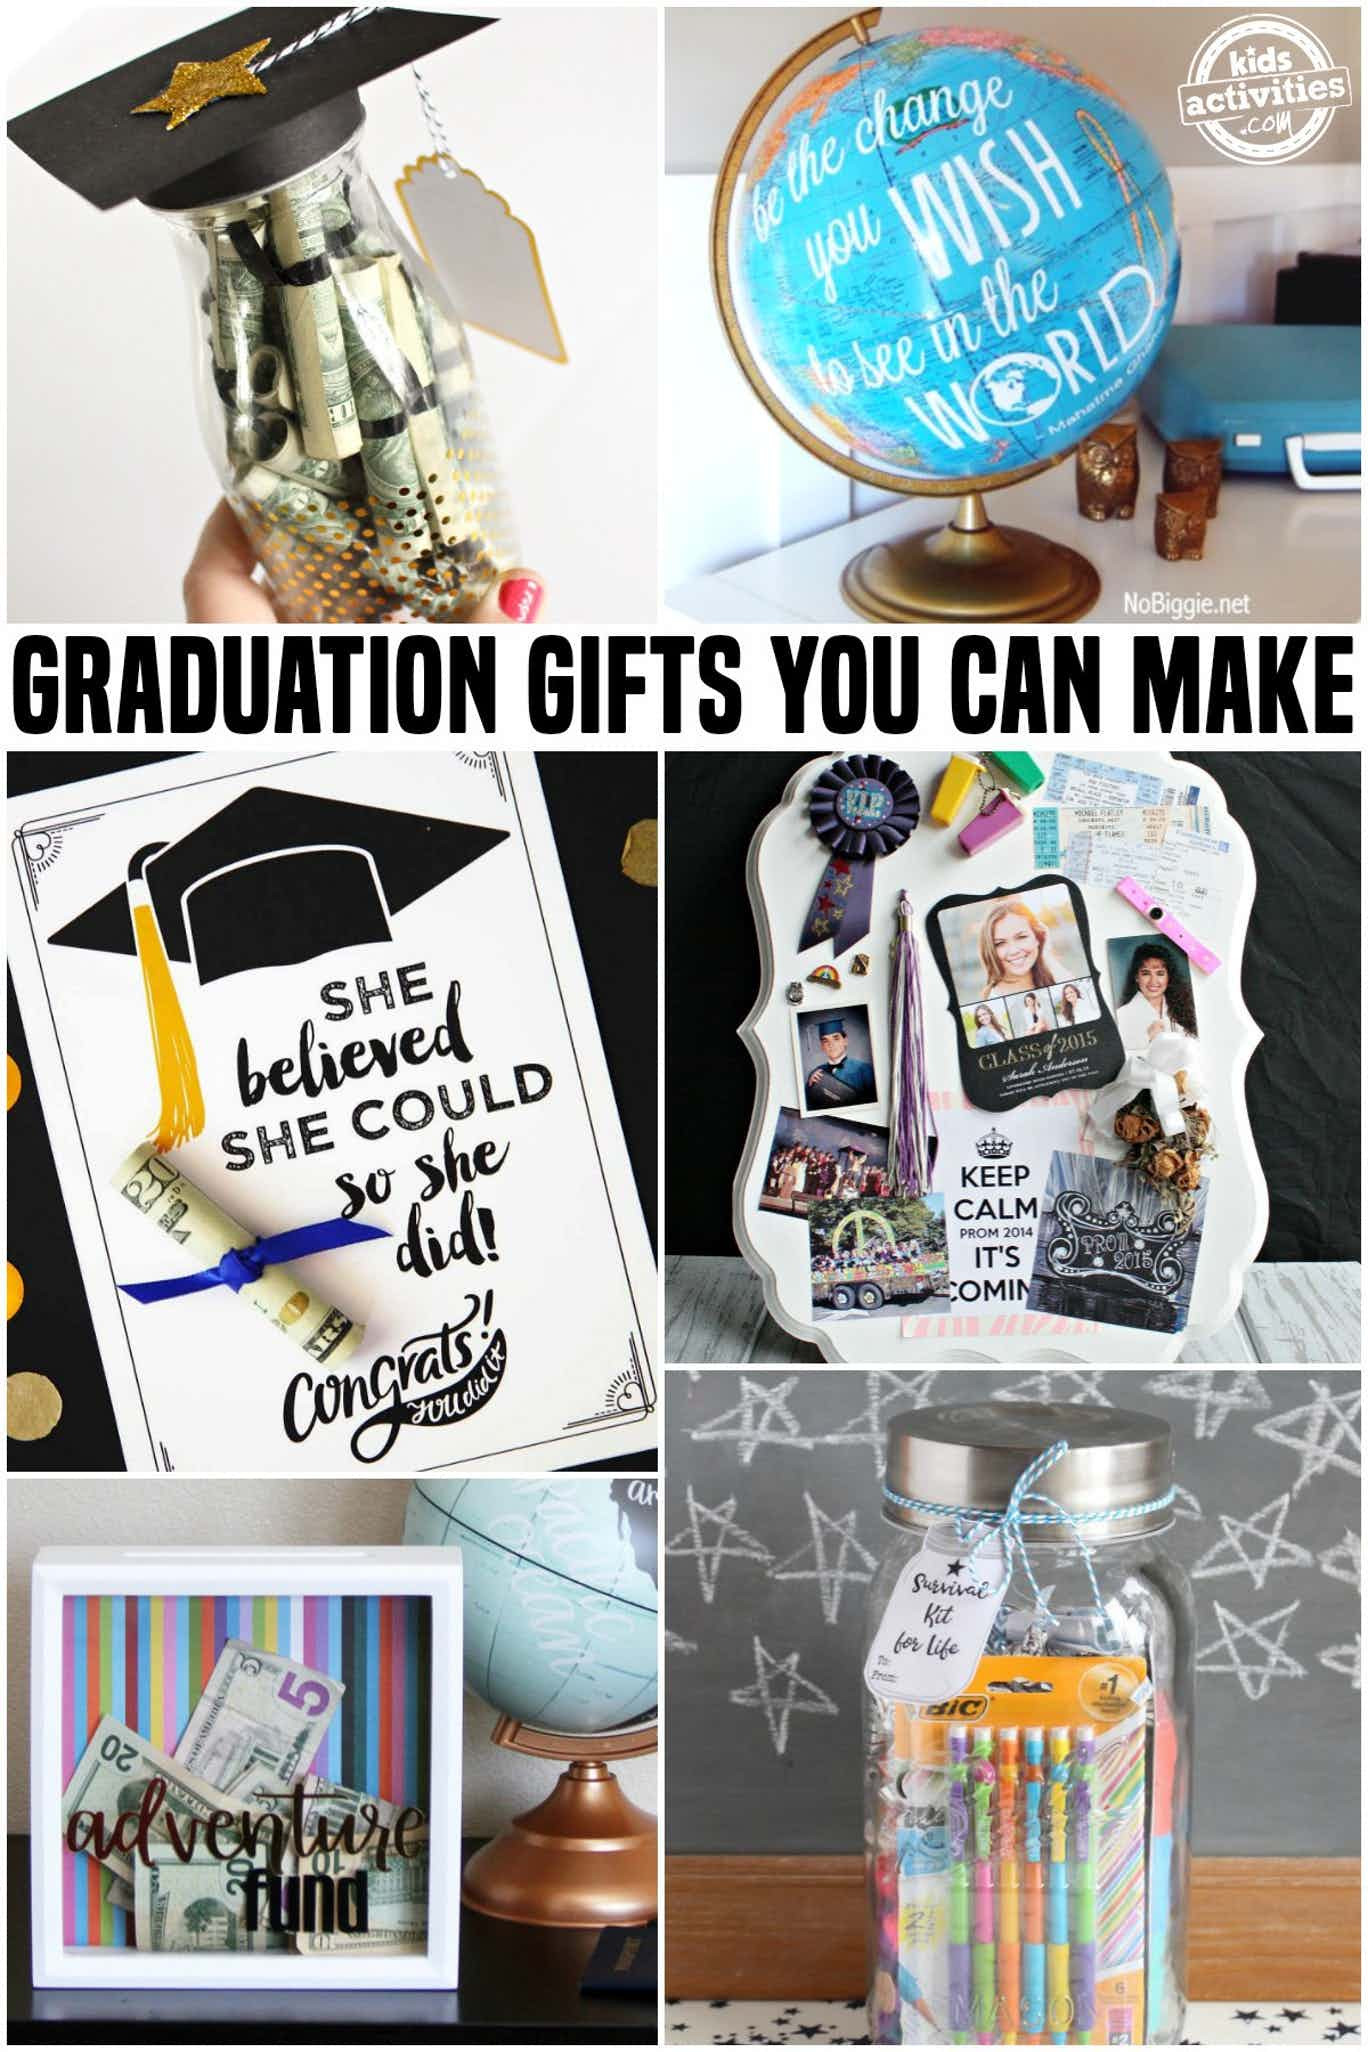 Graduation Day Gift Ideas
 Awesome Graduation Gifts You Can Make At Home